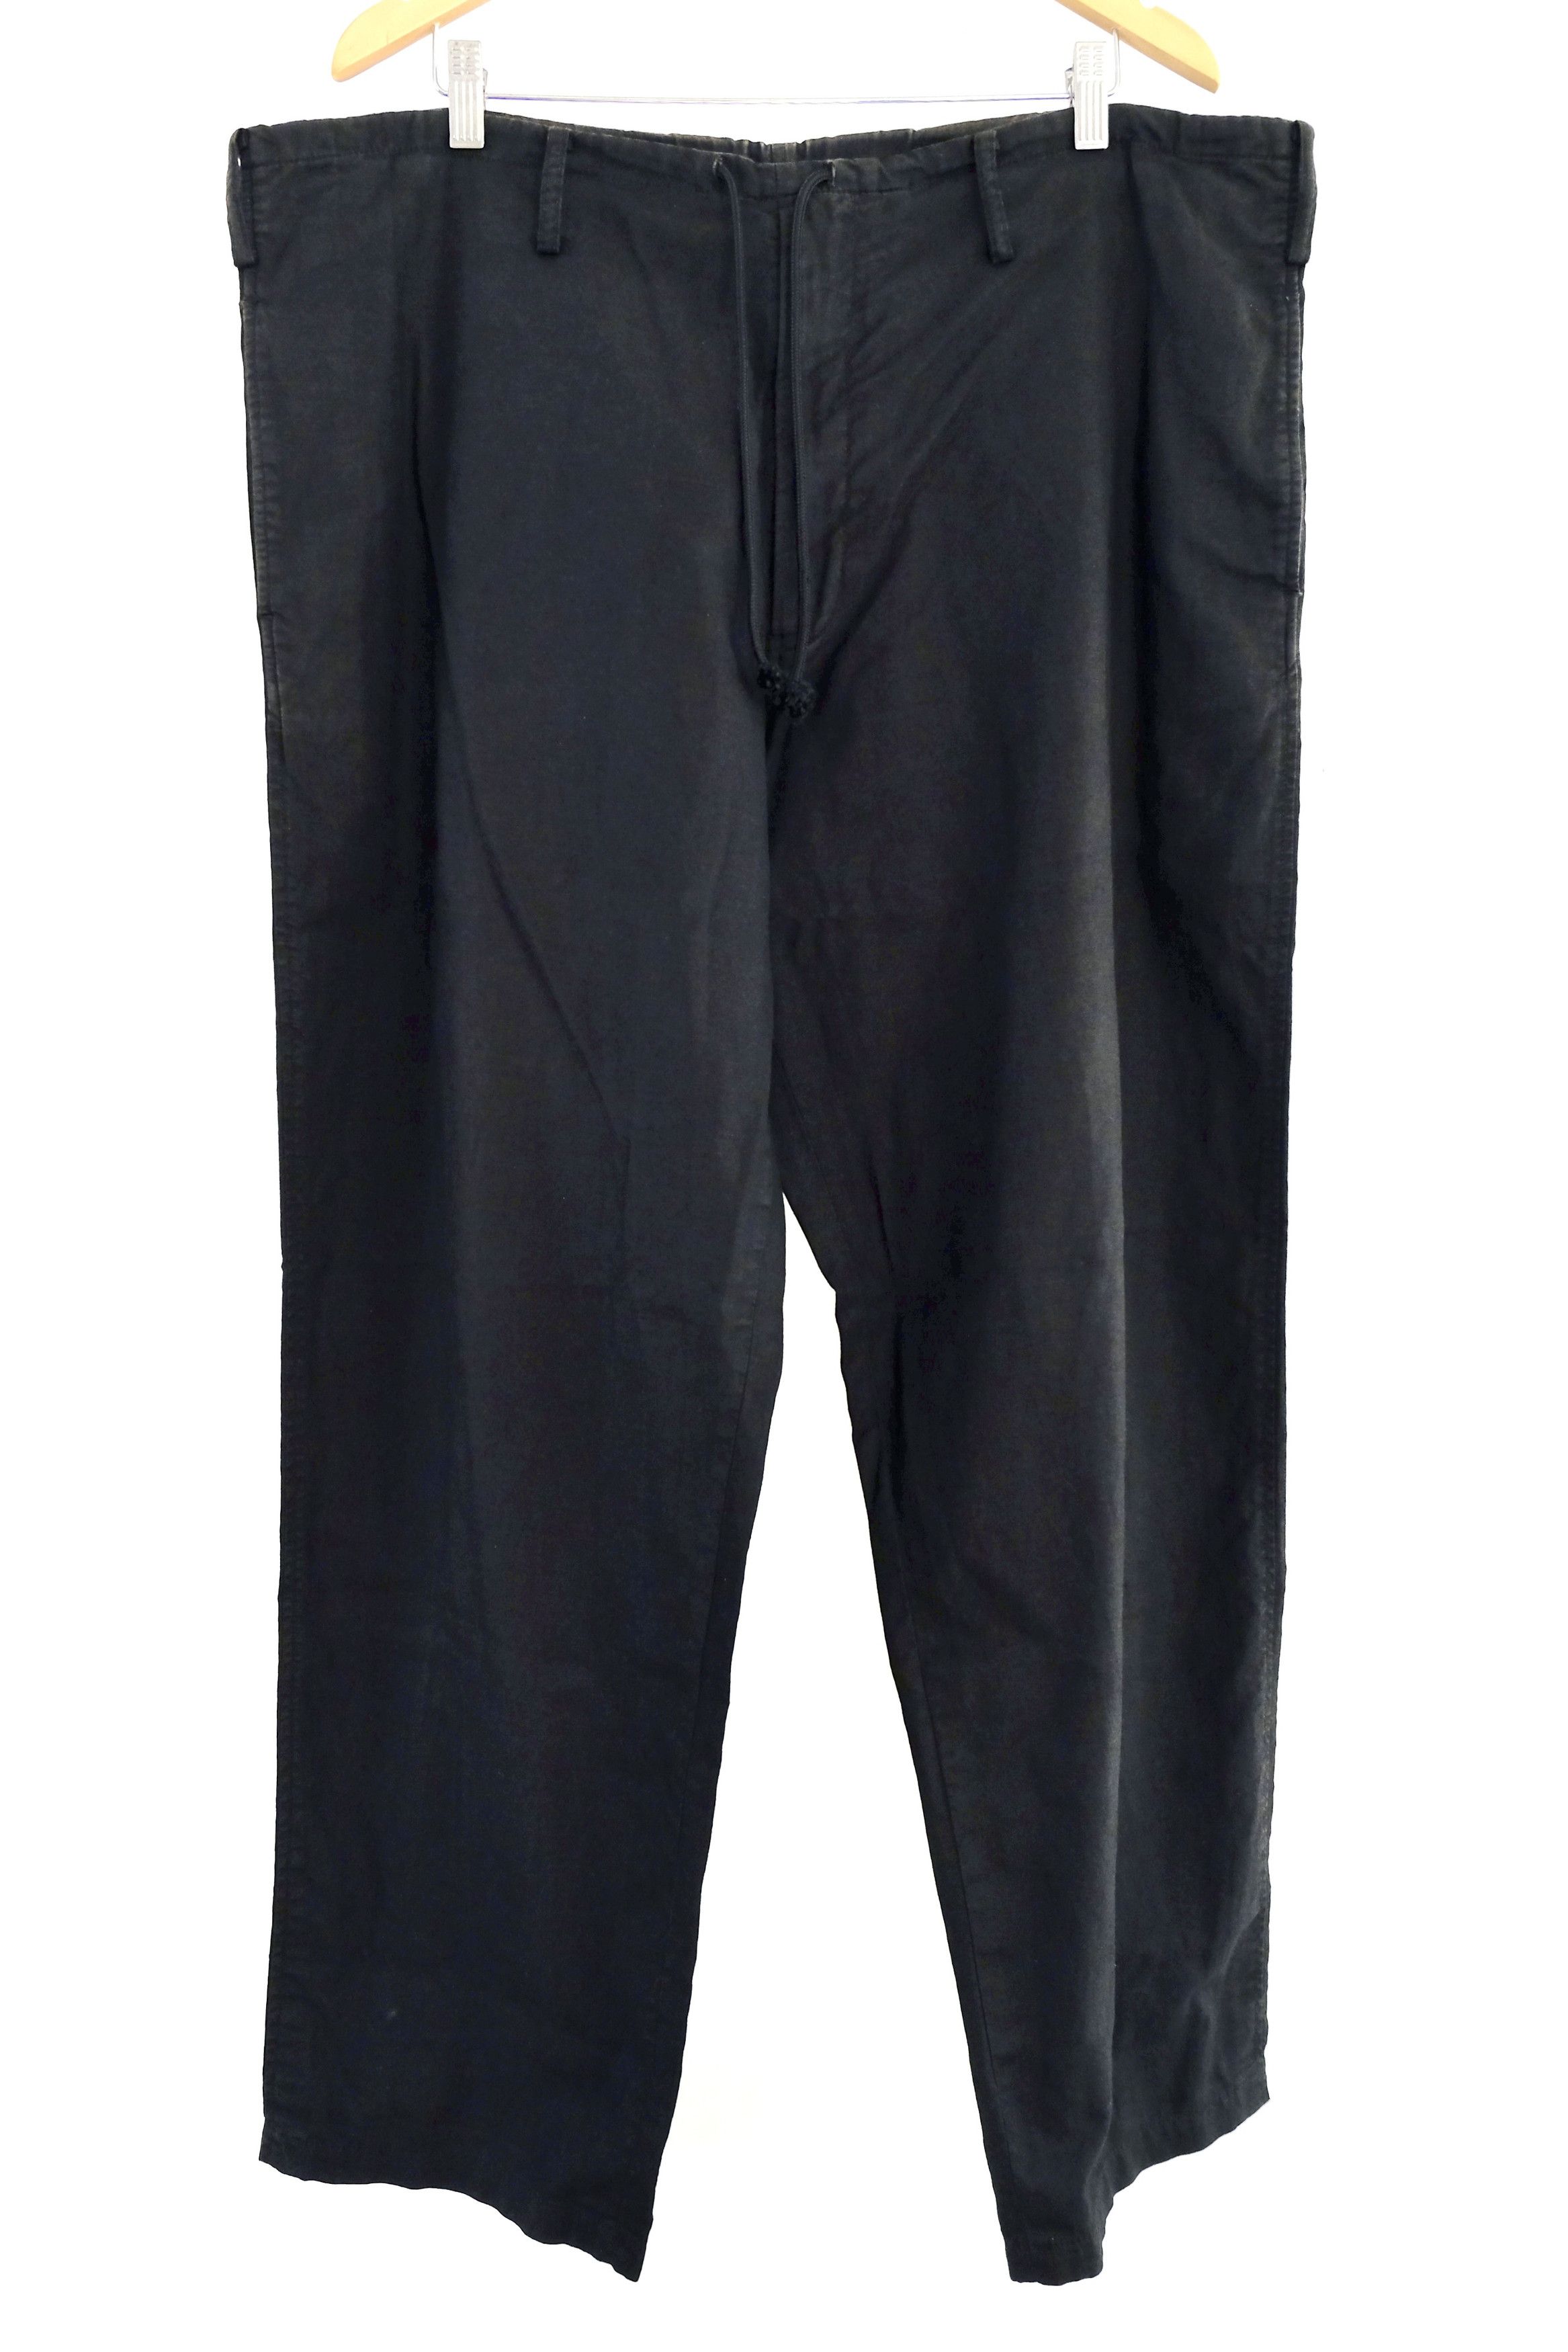 YYPH SS2014 Wide 'Easy Pants', Cotton-Linen, (JP 3) - 2